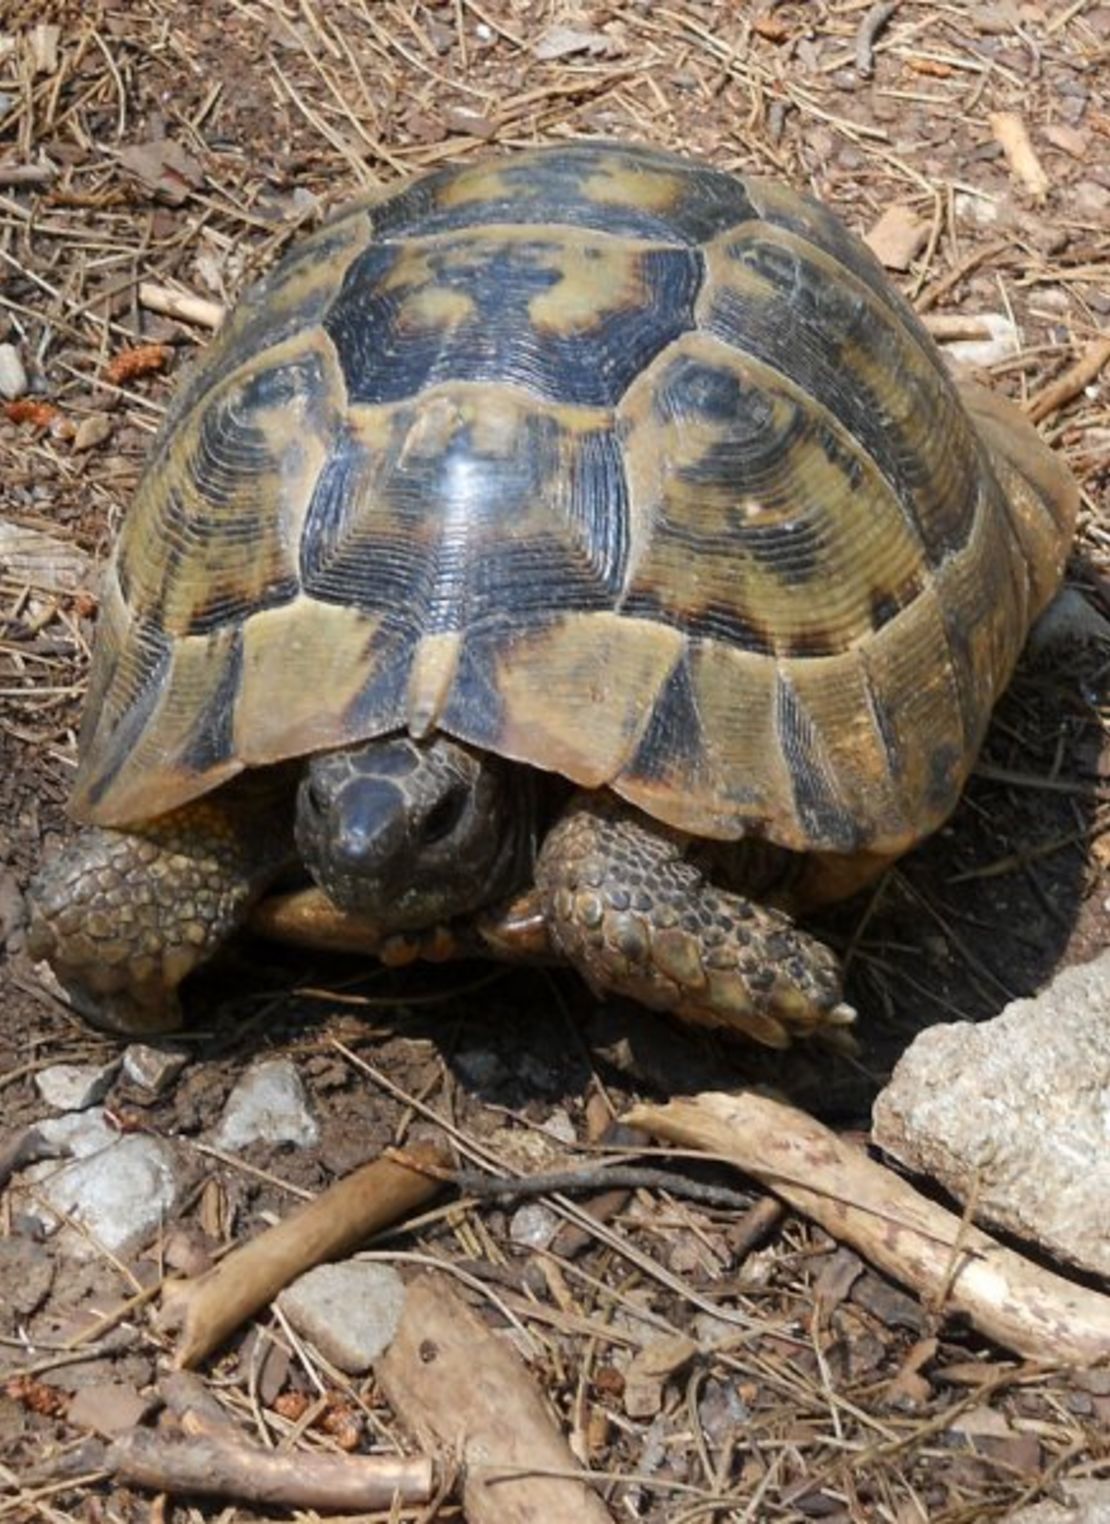 Ruin-spotting companion: one of several kinds of Turkish tortoise.